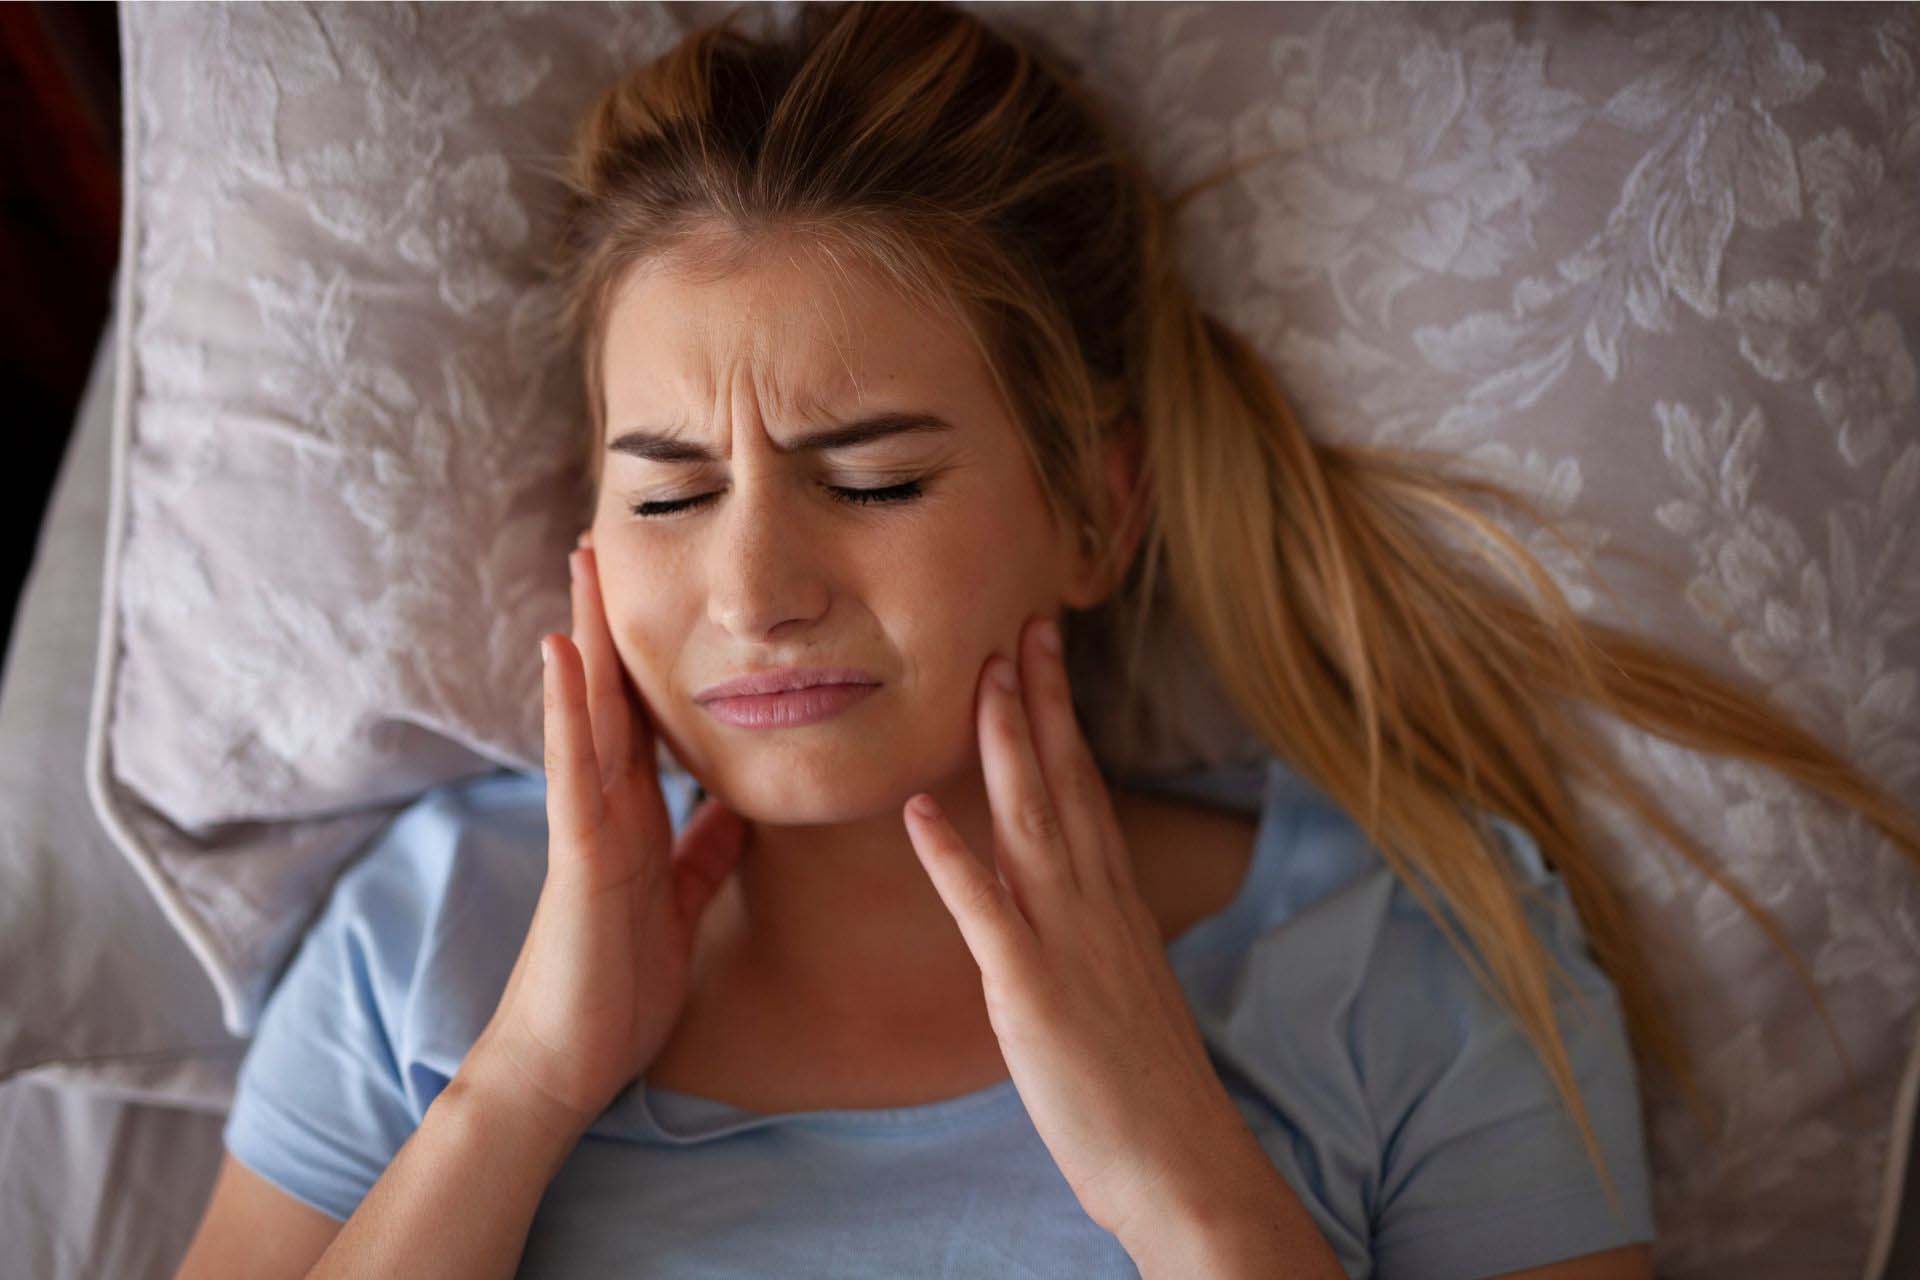 A Los Angeles, CA woman wincing in pain while holding her lower jaw due to facial pain and muscle pain when her mouth is in an open or closed position.